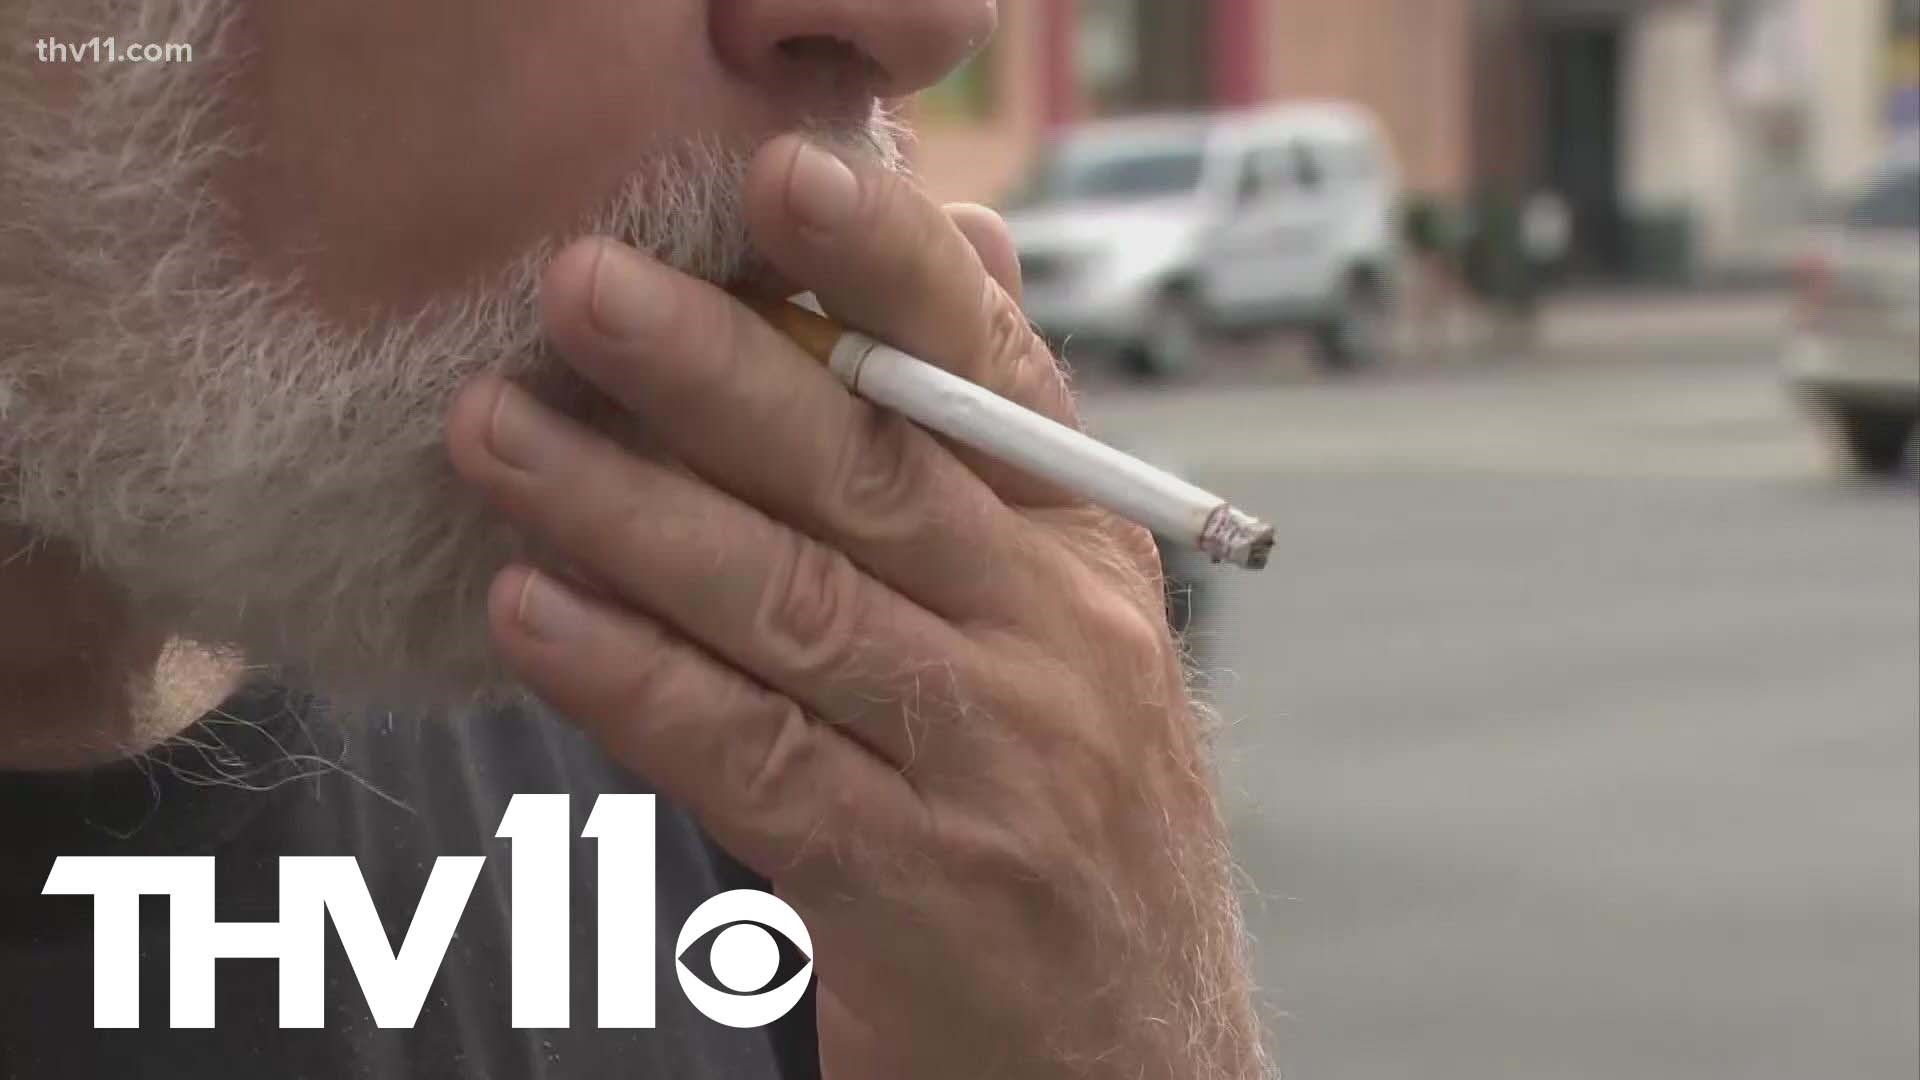 A local Arkansas organization is conducting a trial of a treatment called cytisnicline, which is aimed at helping smokers quit by blocking nicotine receptors.